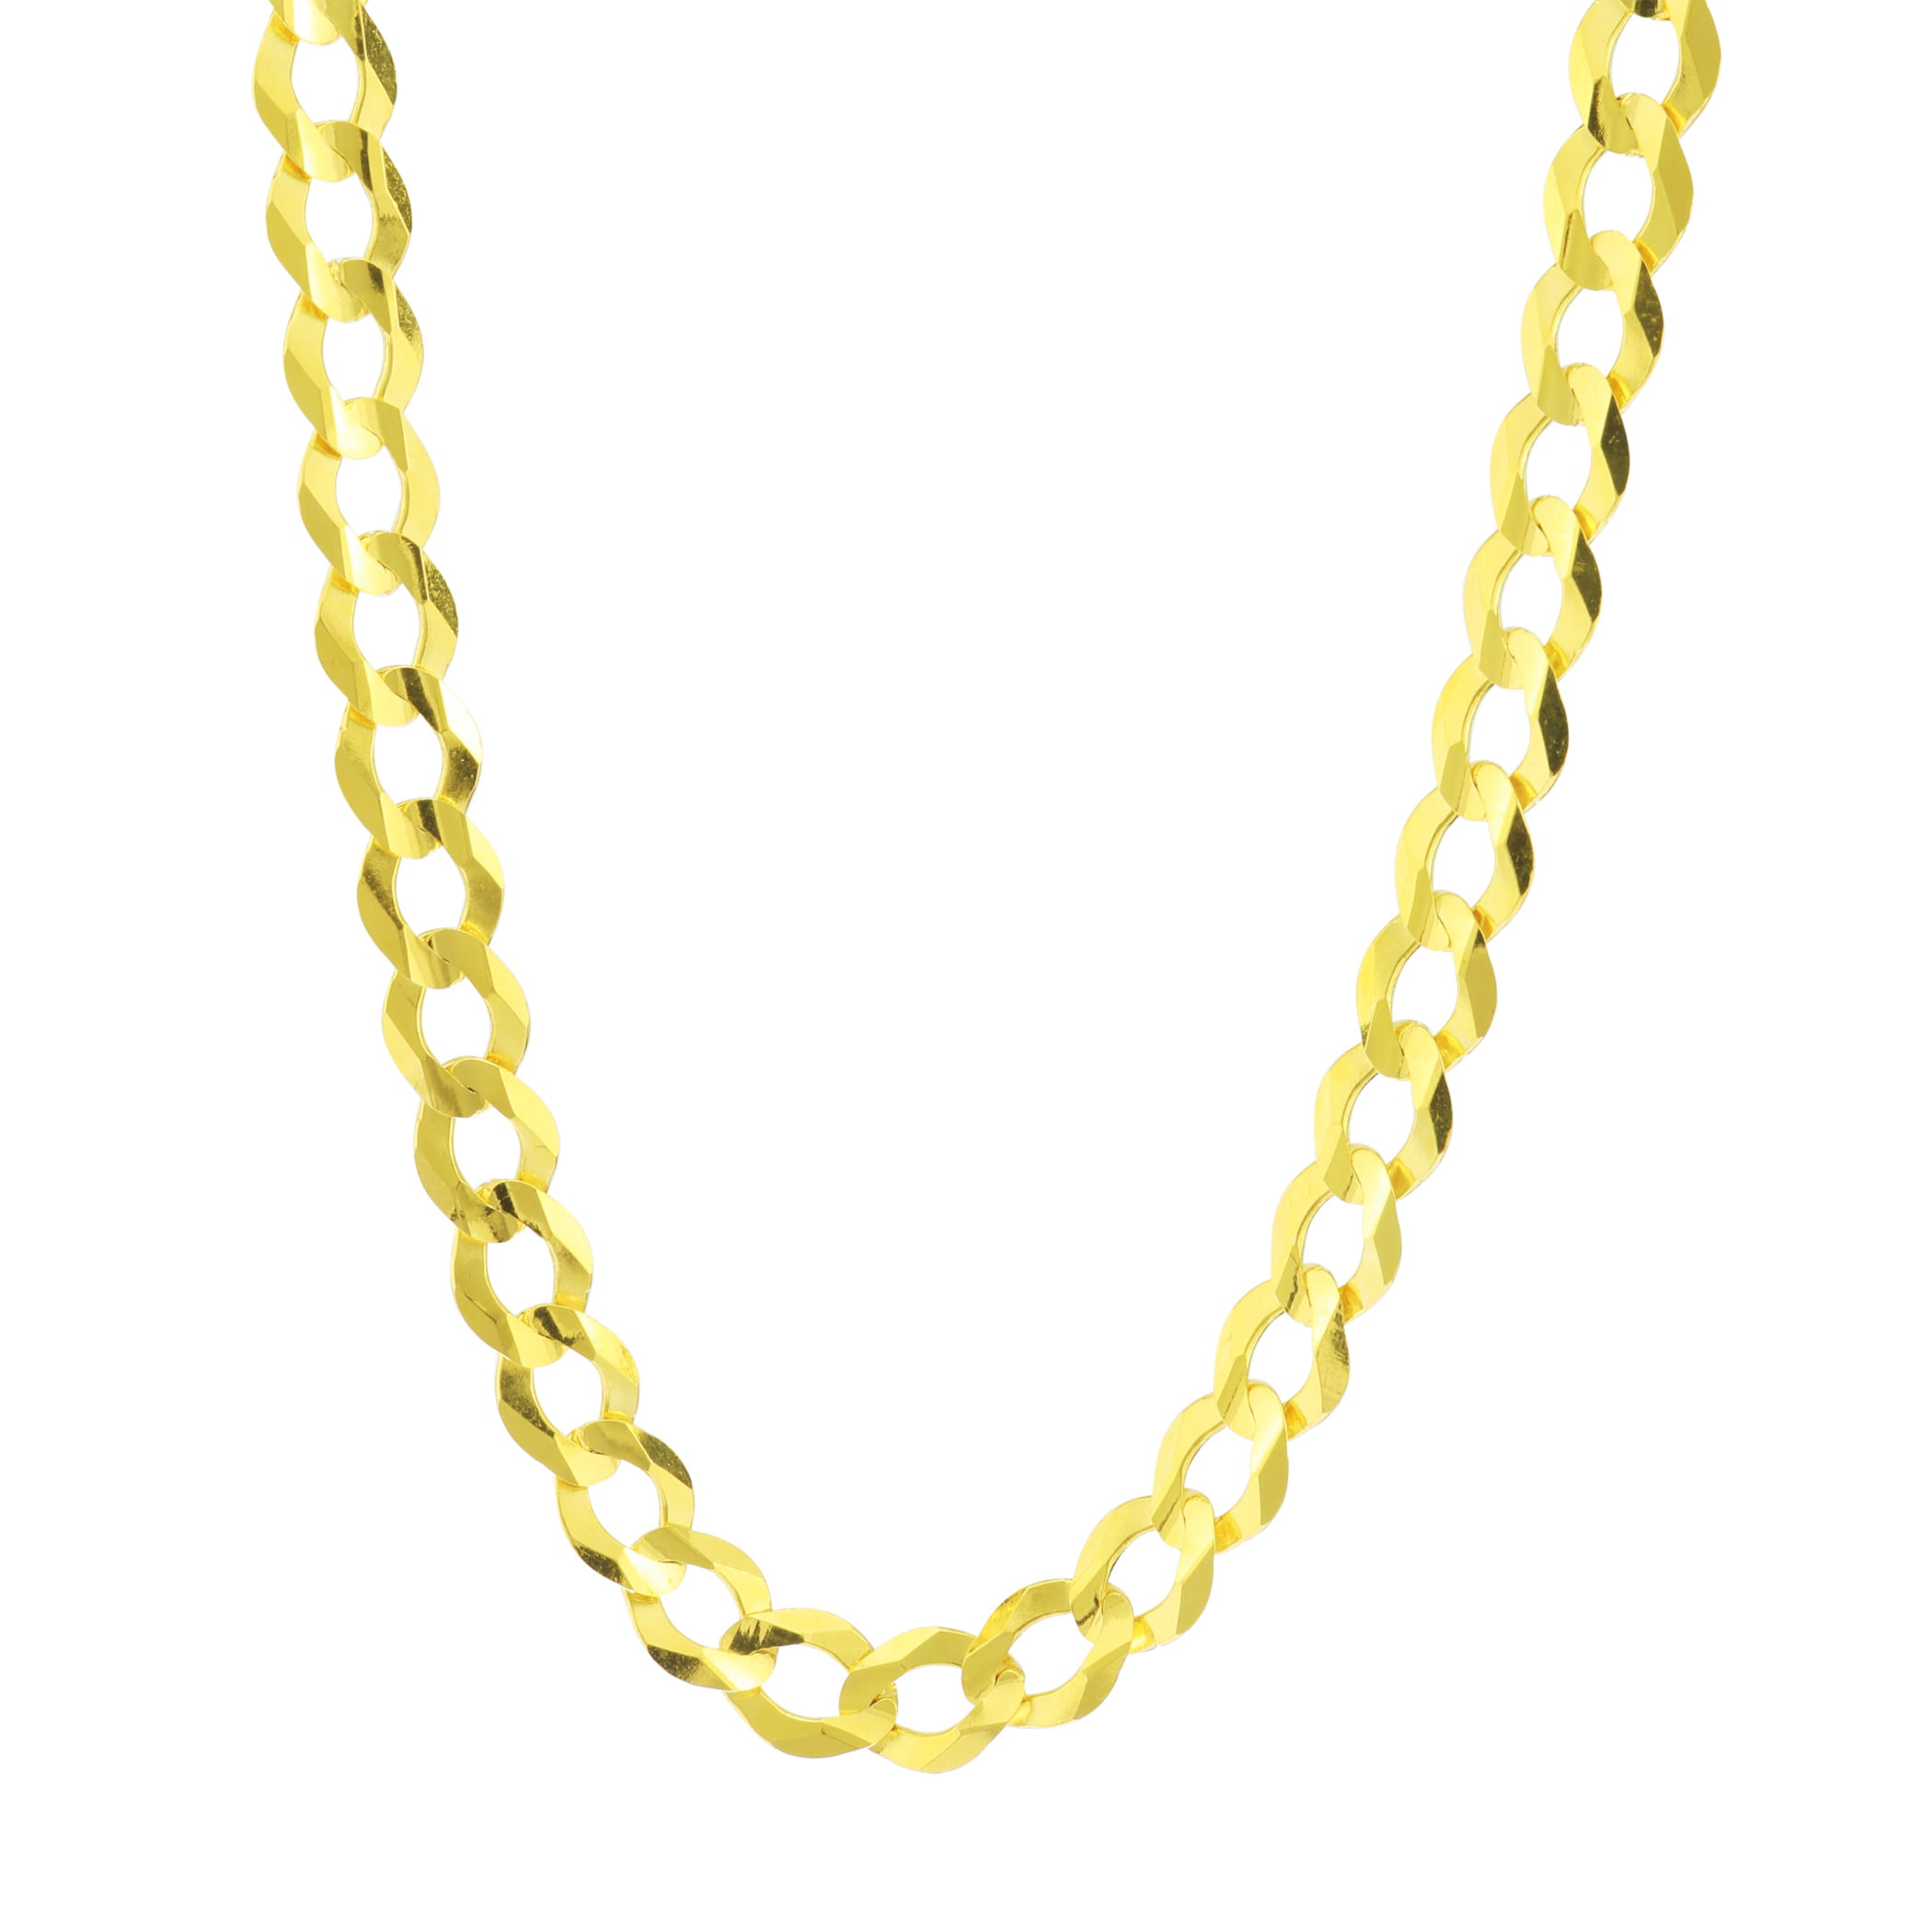 Nuragold - 14k Yellow Gold Solid 8mm Cuban Curb Link Chain Pendant